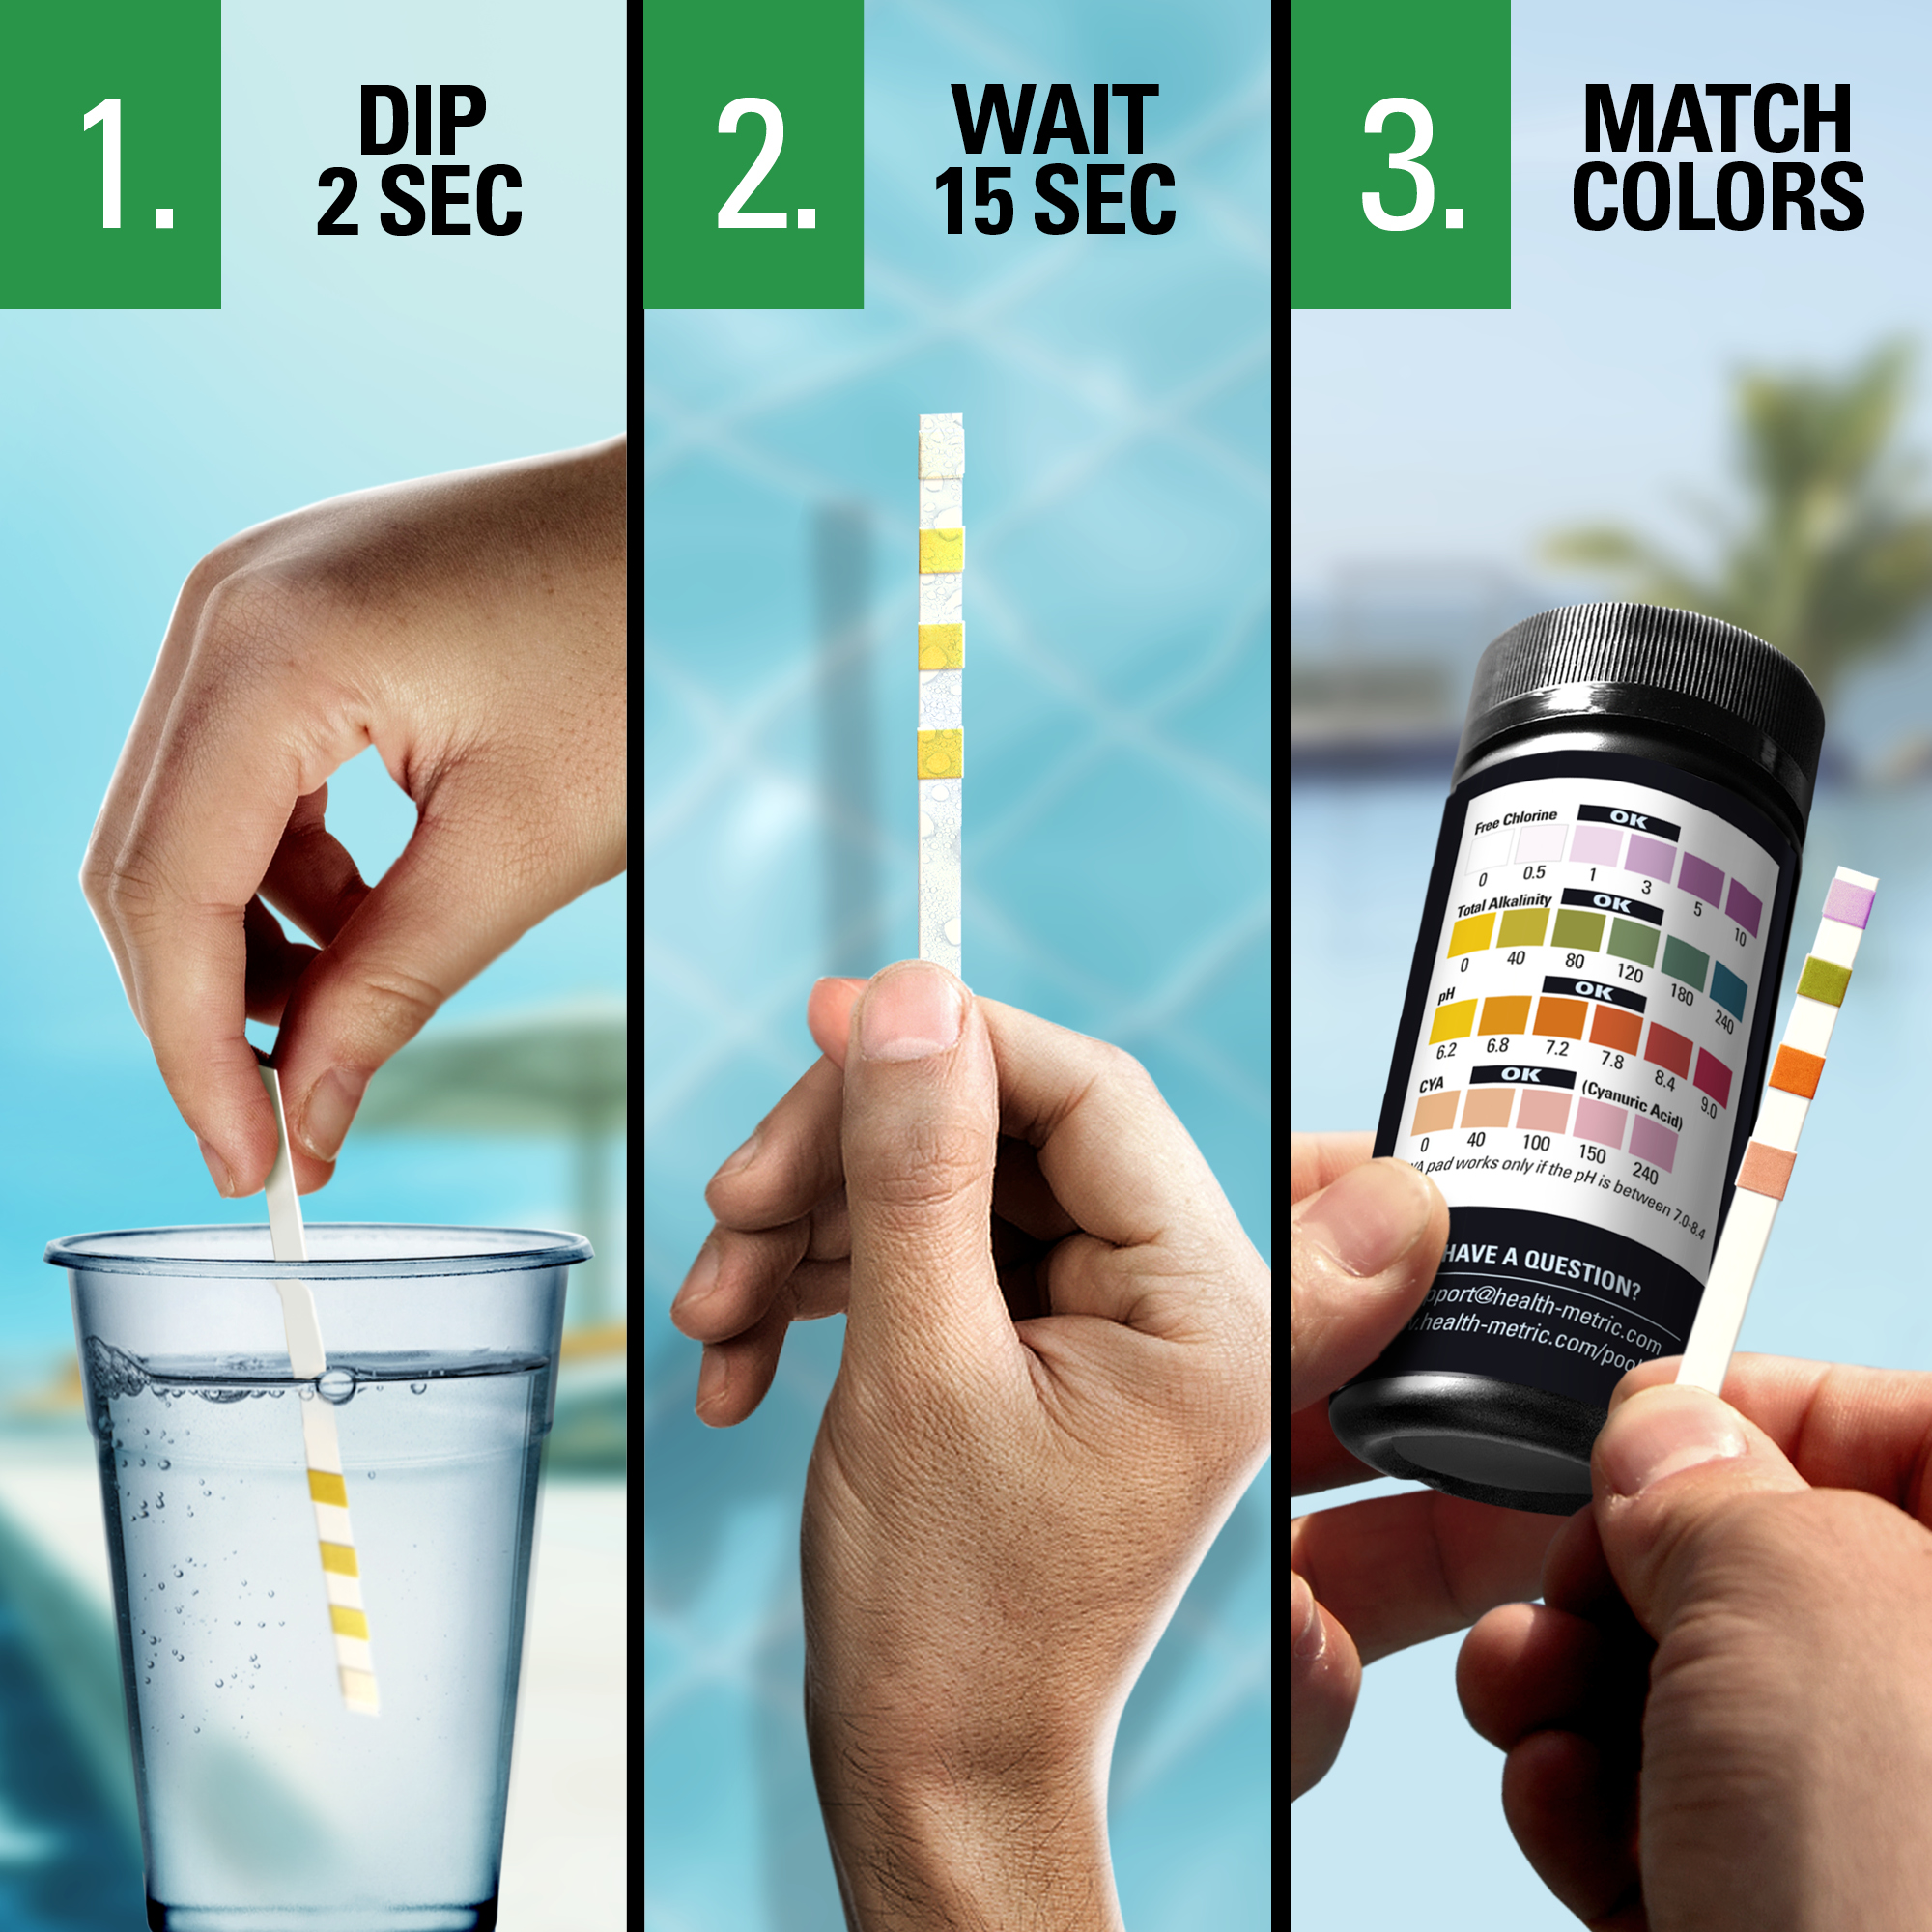 Pool & Spa Test Kit - Essential 4-in-1 Analysis - For Balanced and Crystal Clear Water